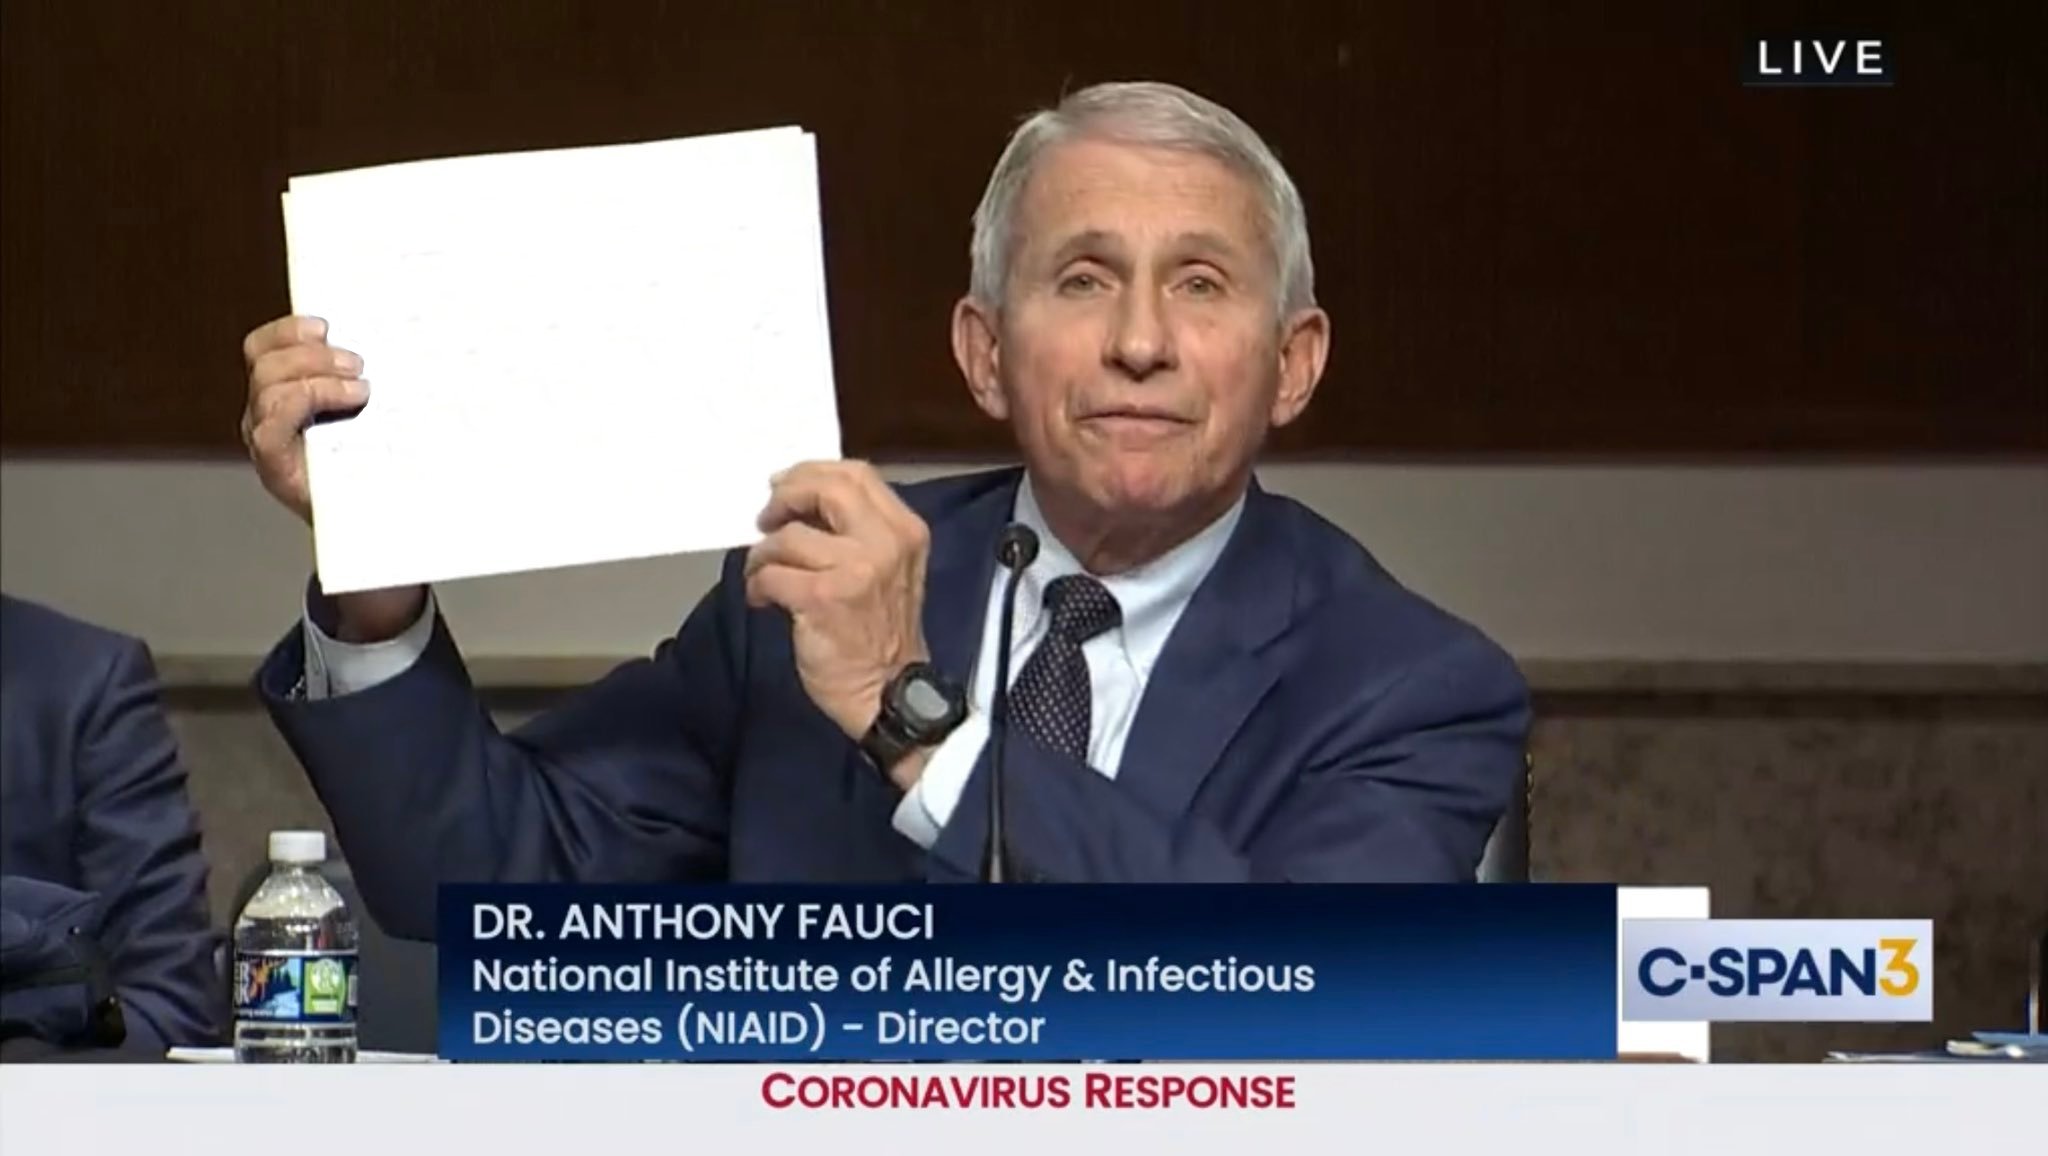 High Quality Fauci holding up paper (blank) Blank Meme Template